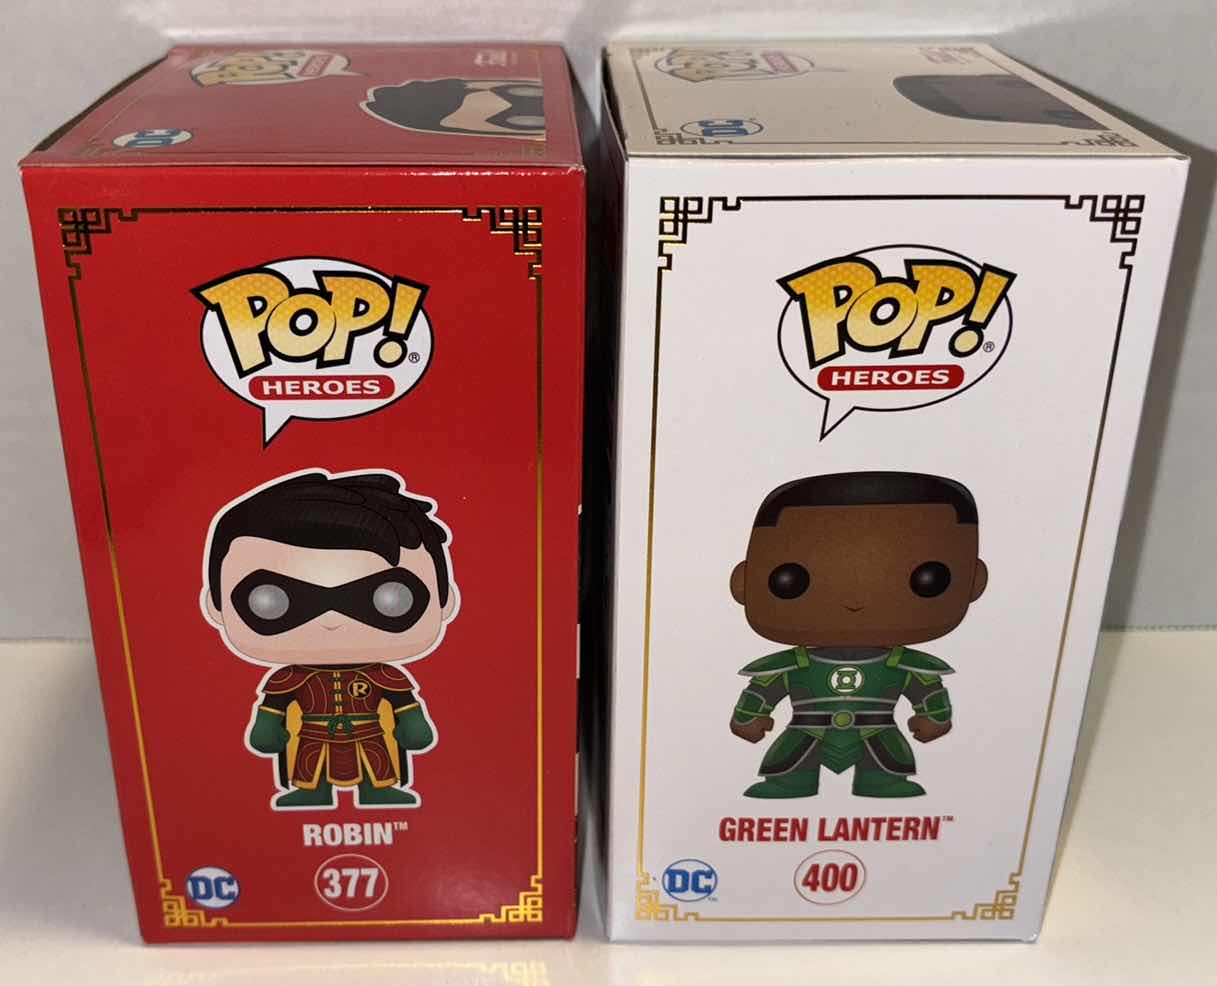 Photo 2 of NEW FUNKO POP! HEROES DC IMPERIAL PALACE VINYL FIGURE 2-PACK, #377 ROBIN & #400 GREEN LANTERN